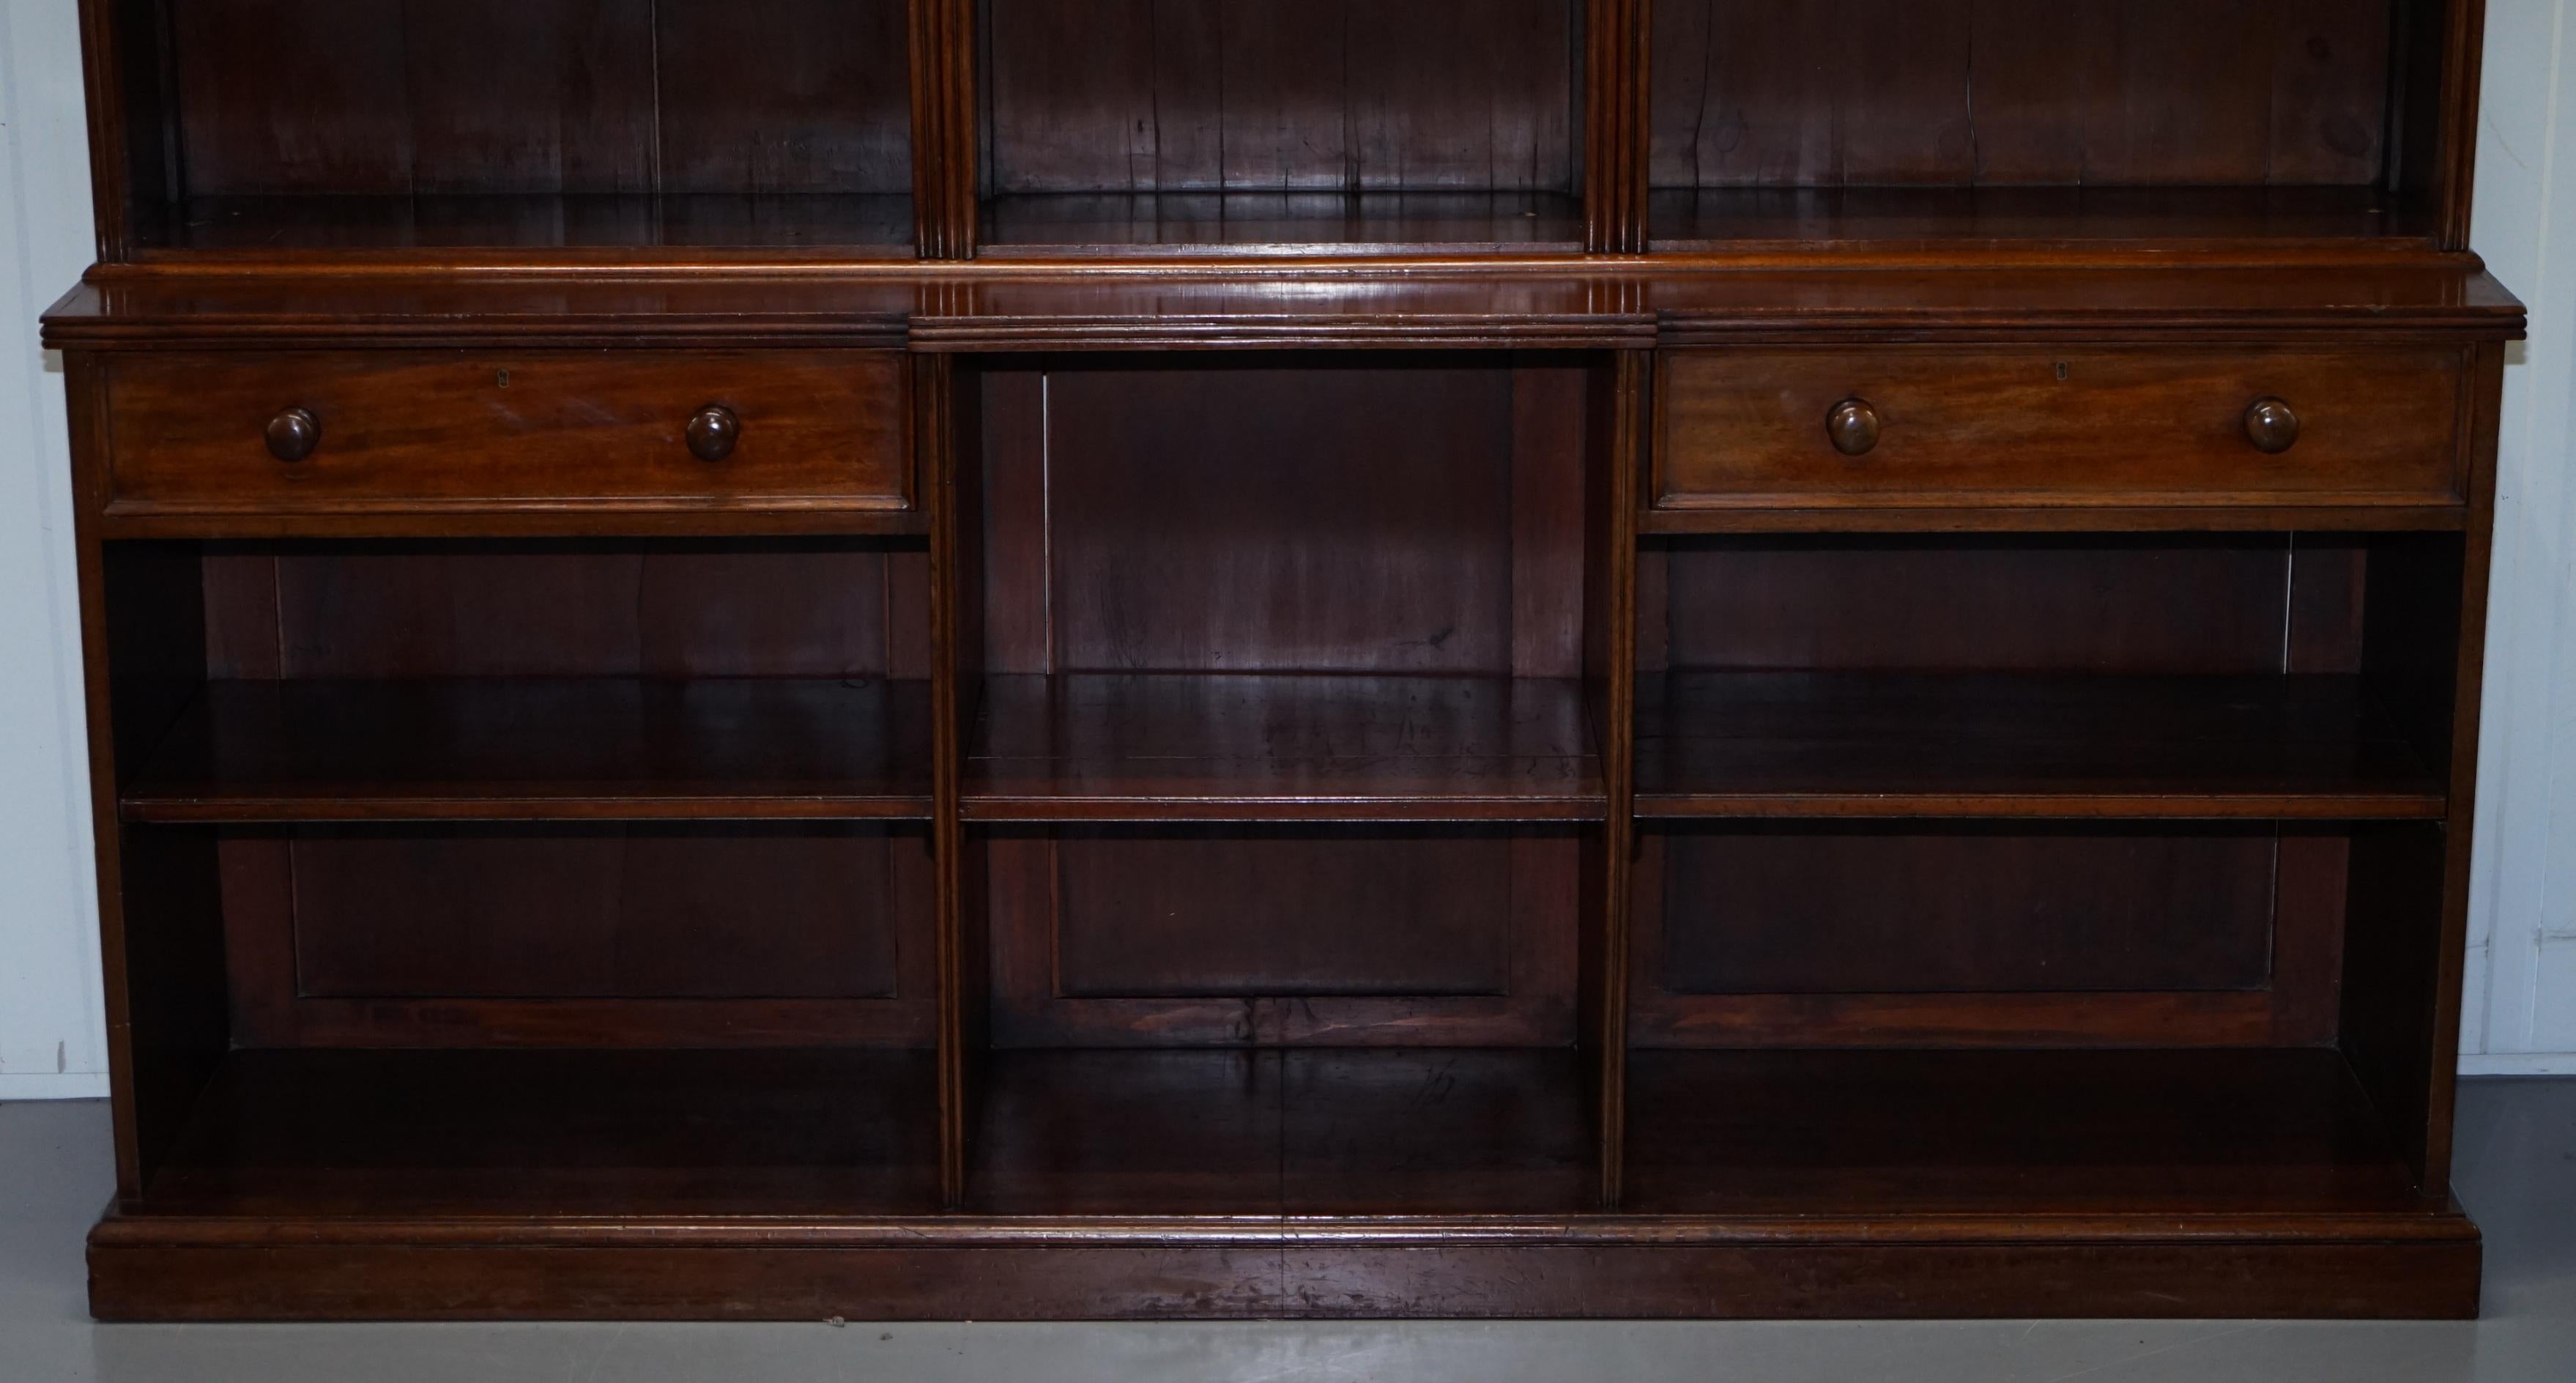 We are delighted to offer for sale this stunning and very large Victorian circa 1860 solid mahogany library breakfront bookcase

A truly stunning piece, this bookcase is very tall, all the shelves are removable and height adjustable so you can